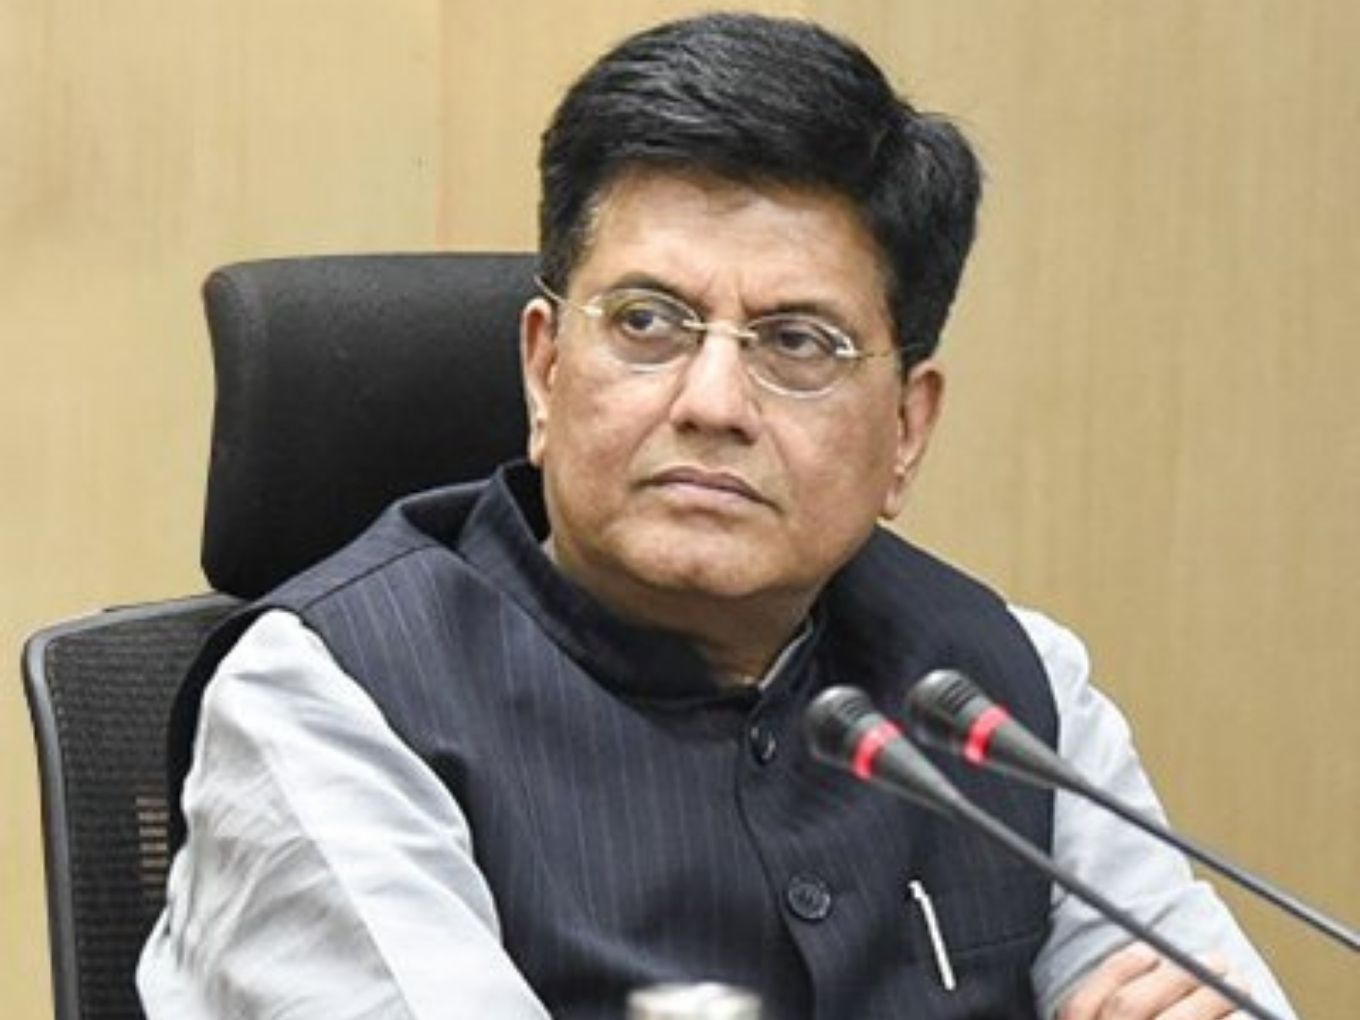 Stringent Changes In Ecommerce FDI Policy Incoming, Piyush Goyal Tells CAIT